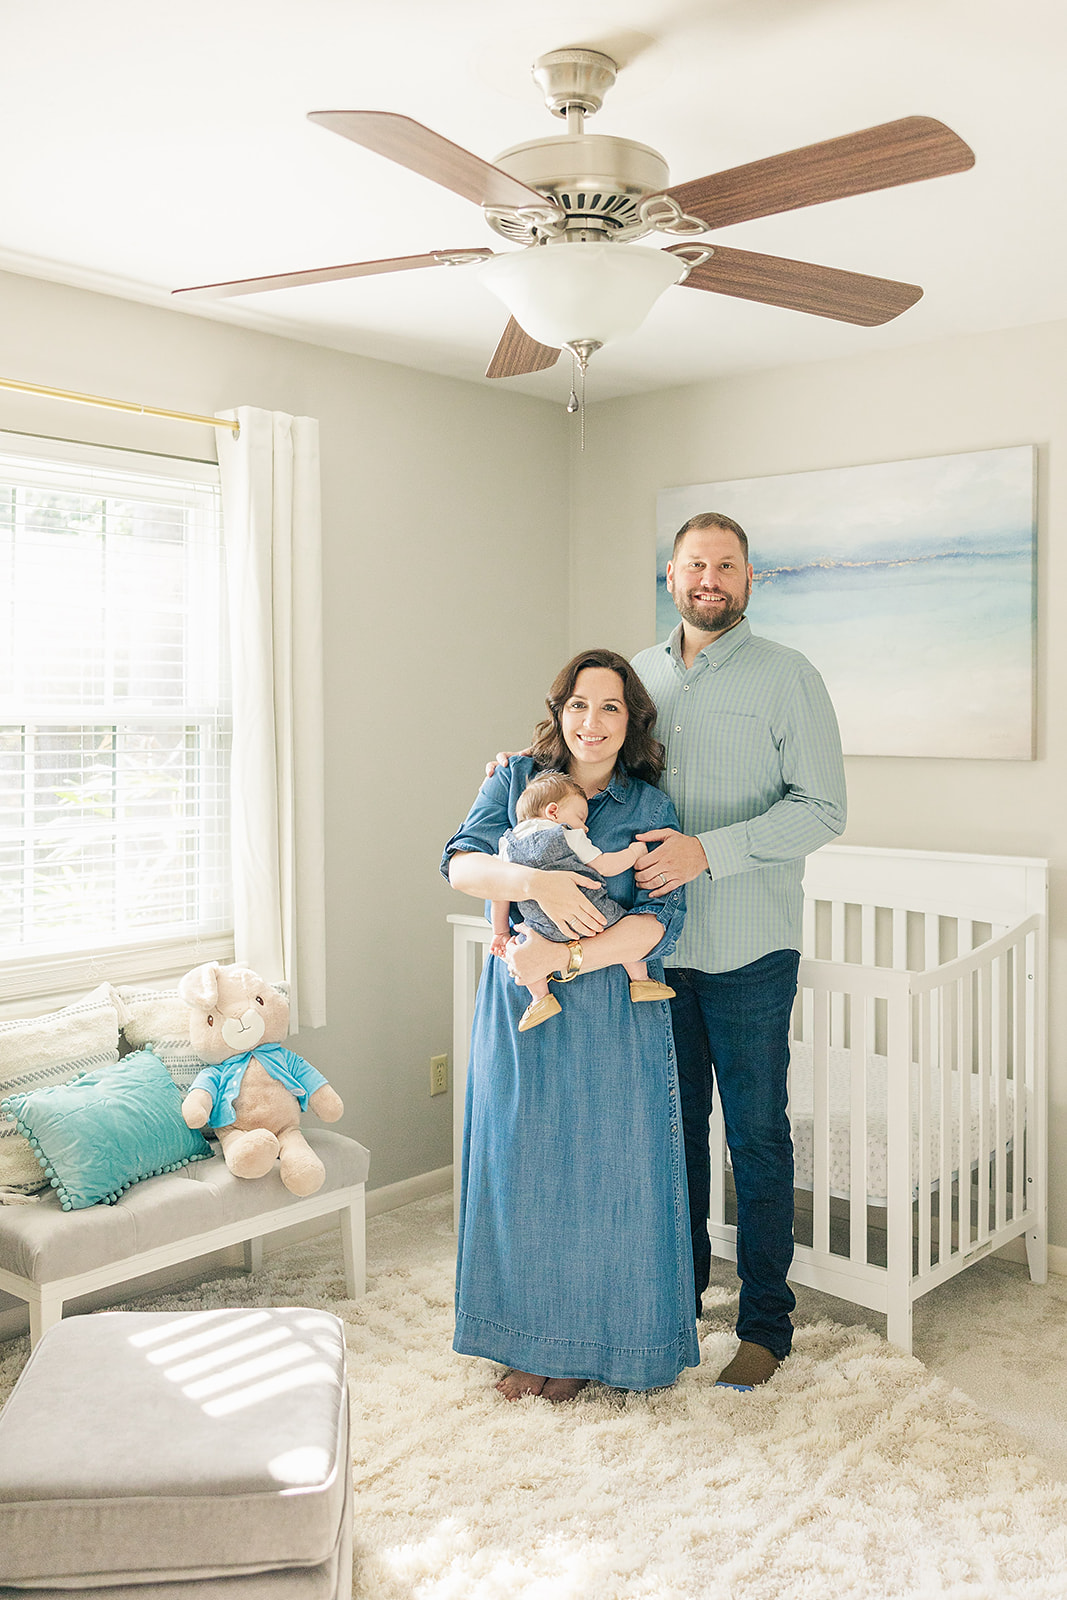 Newborn Baby Boy Photography in a Blue, Teal, and Cream Nursery: Capturing Joyful Moments in a Calm Environment